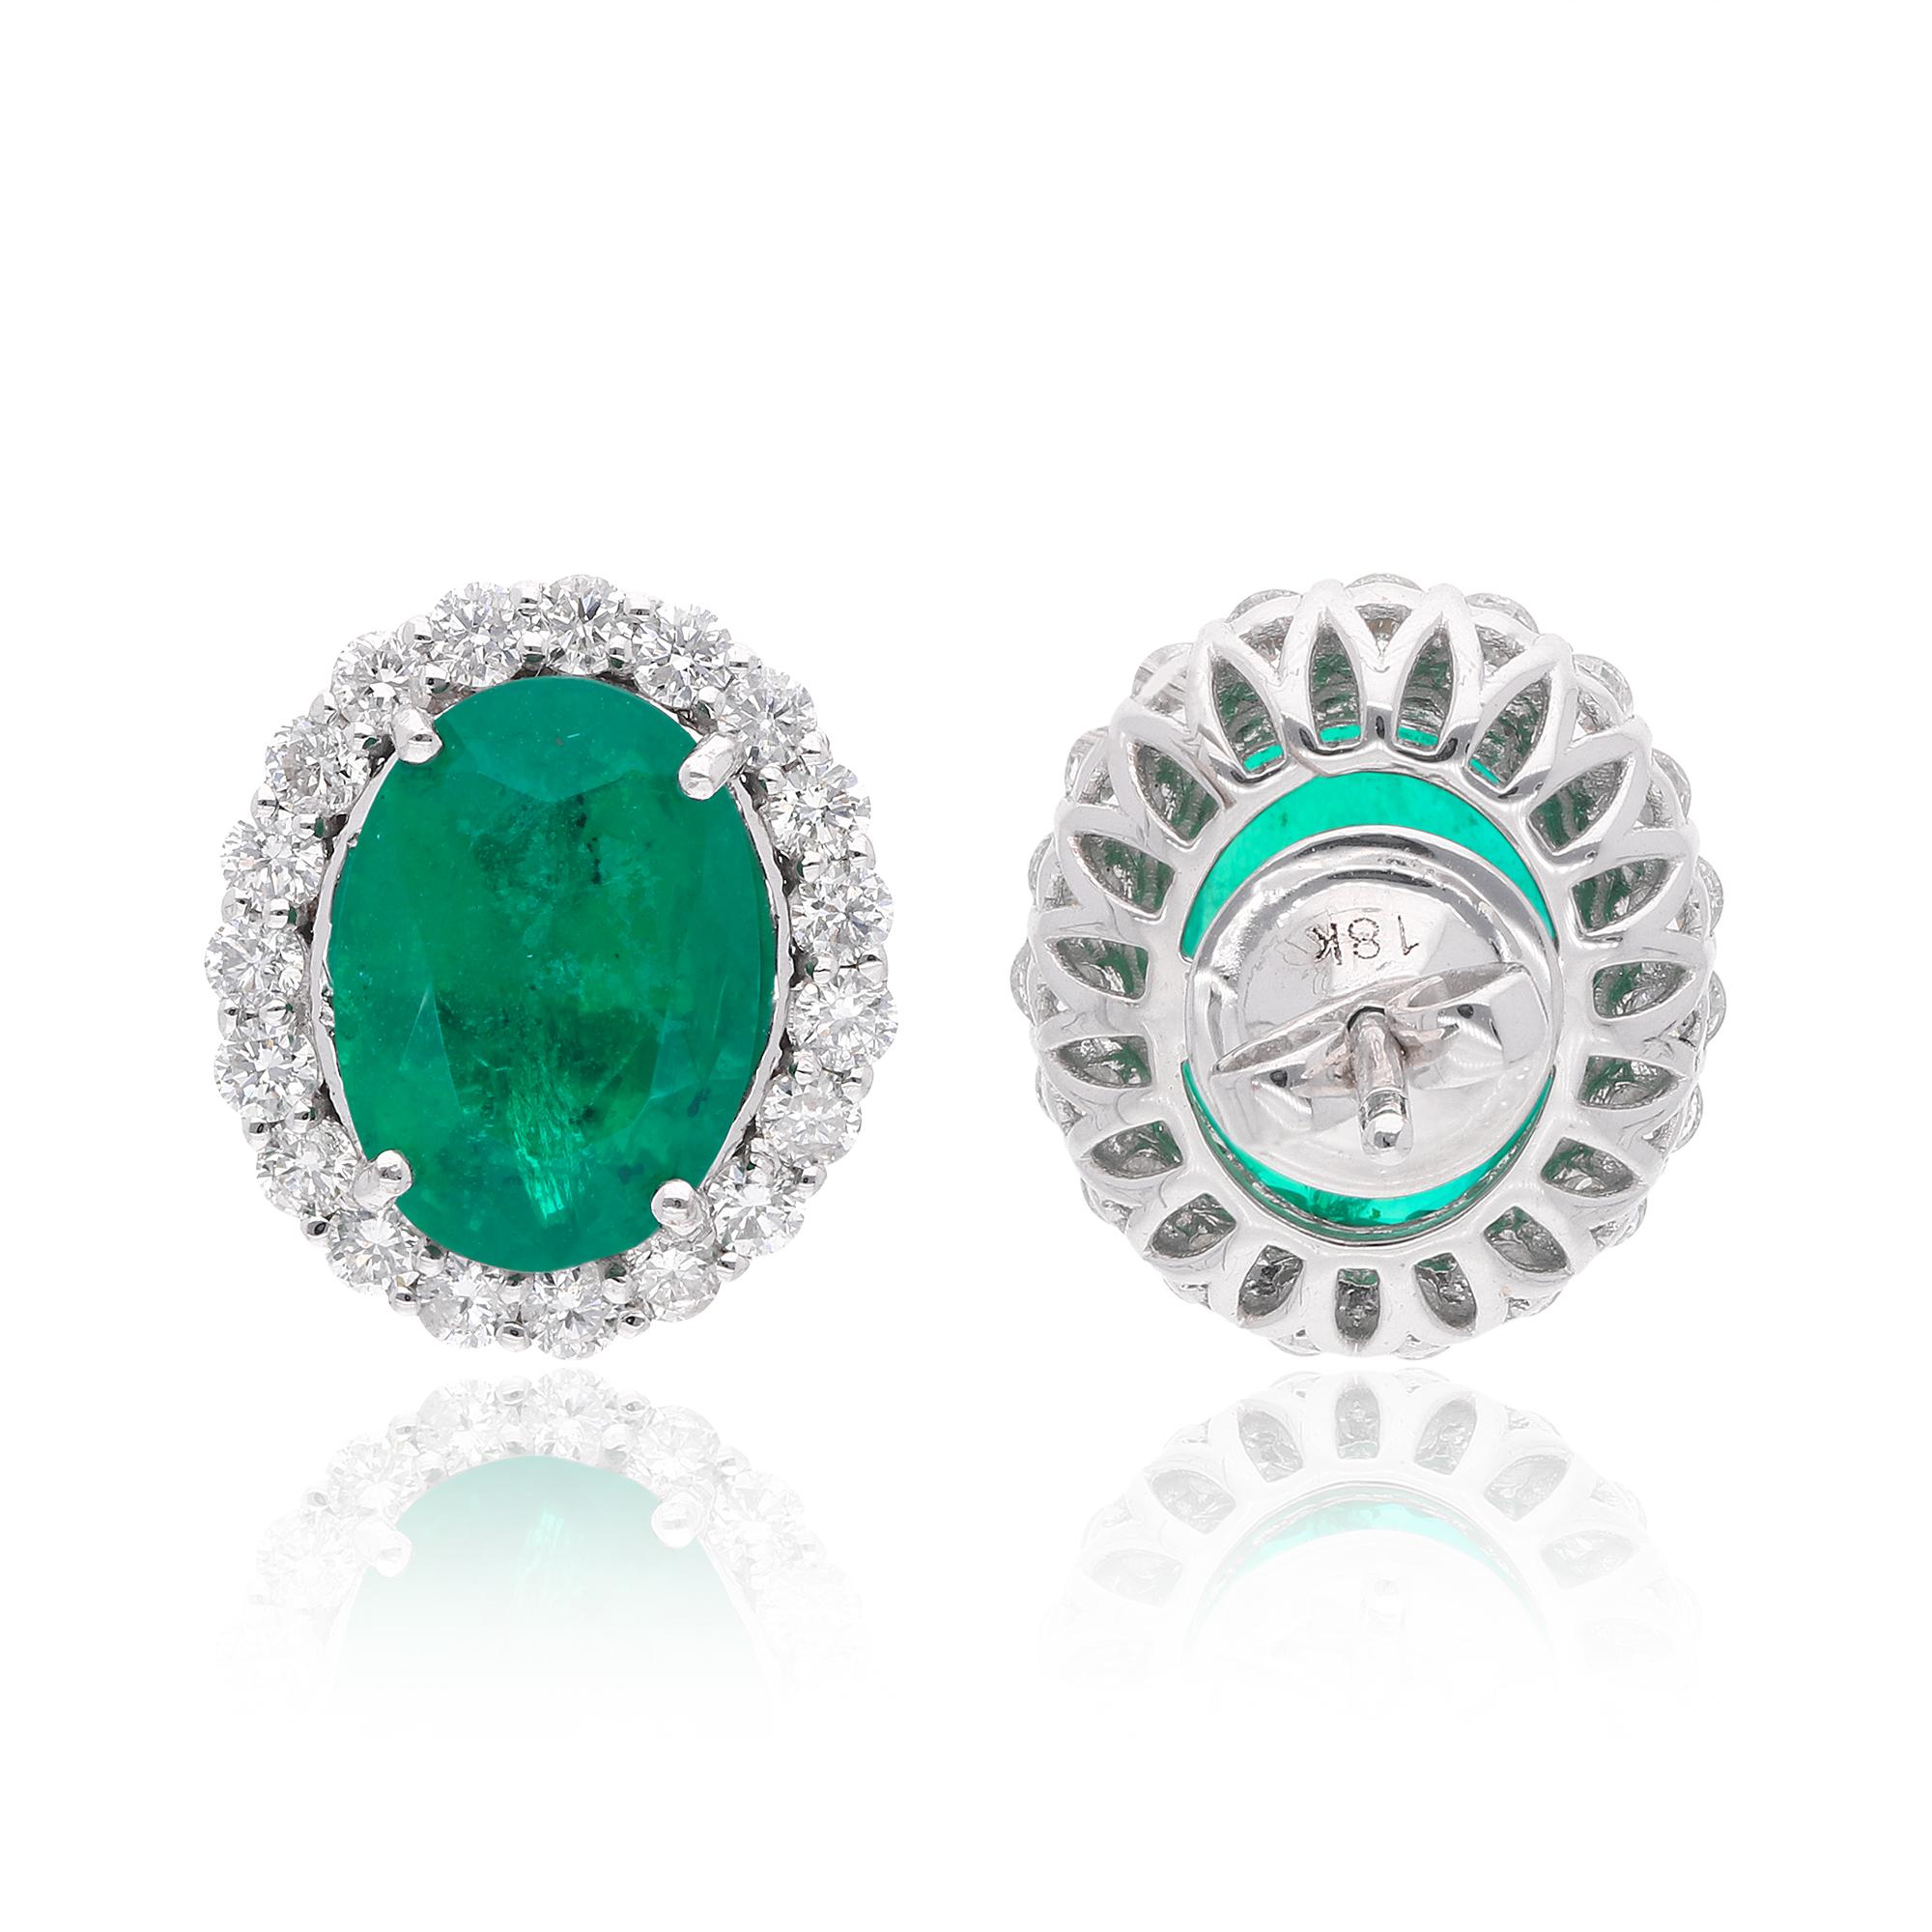 Item Code :- SEE-13108
Gross Wt. :- 6.09 gm
18k White Gold Wt. :- 4.67 gm
Natural Diamond Wt. :- 1.20 Ct. ( AVERAGE DIAMOND CLARITY SI1-SI2 & COLOR H-I )
Natural Emerald Wt. :- 5.91 Ct. 
Earrings Size :- 16 mm approx.

✦